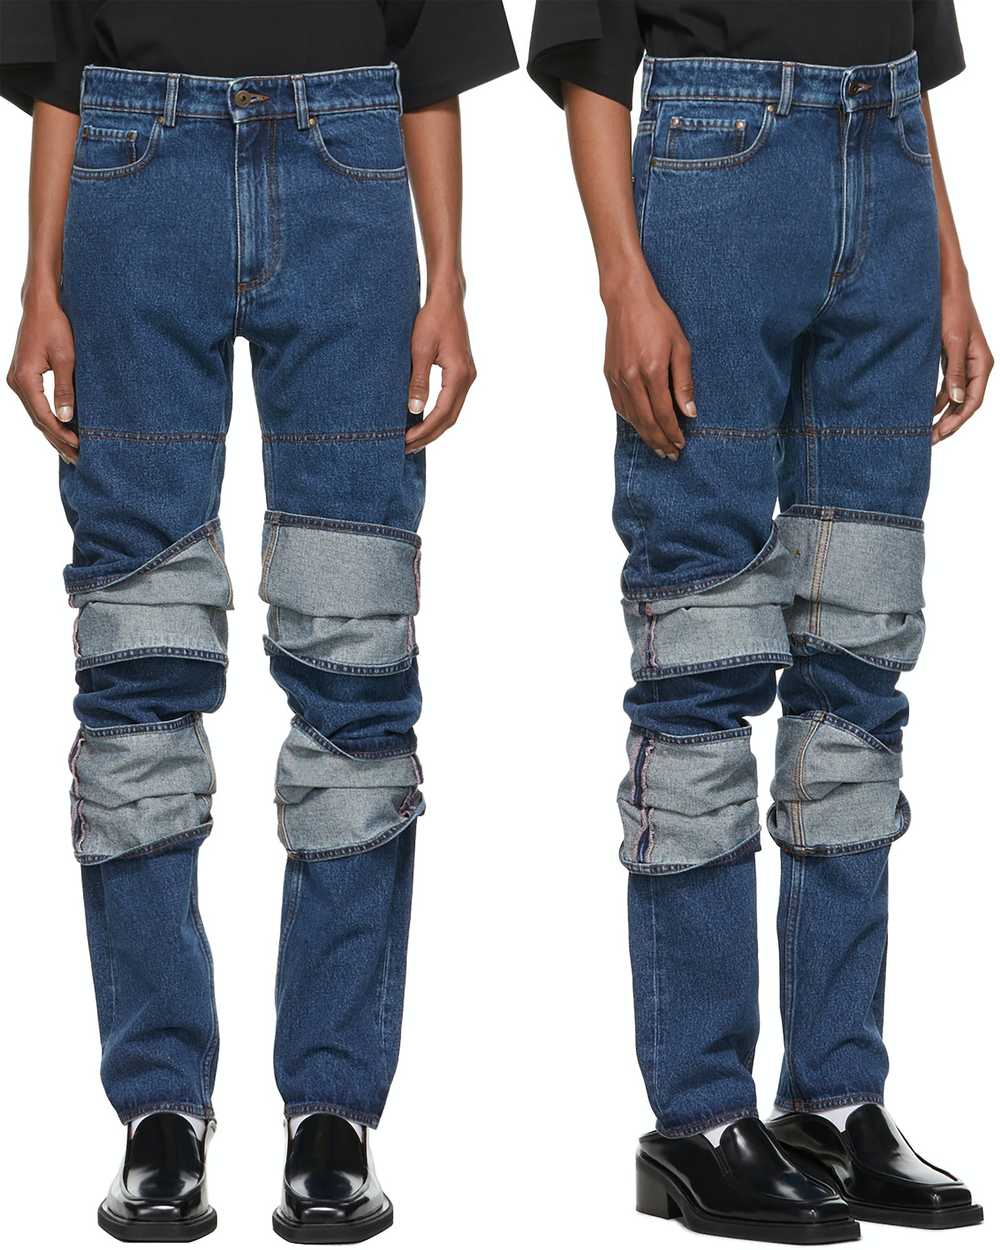 Y/Project Y/Project Multi Cuff Jeans - image 5